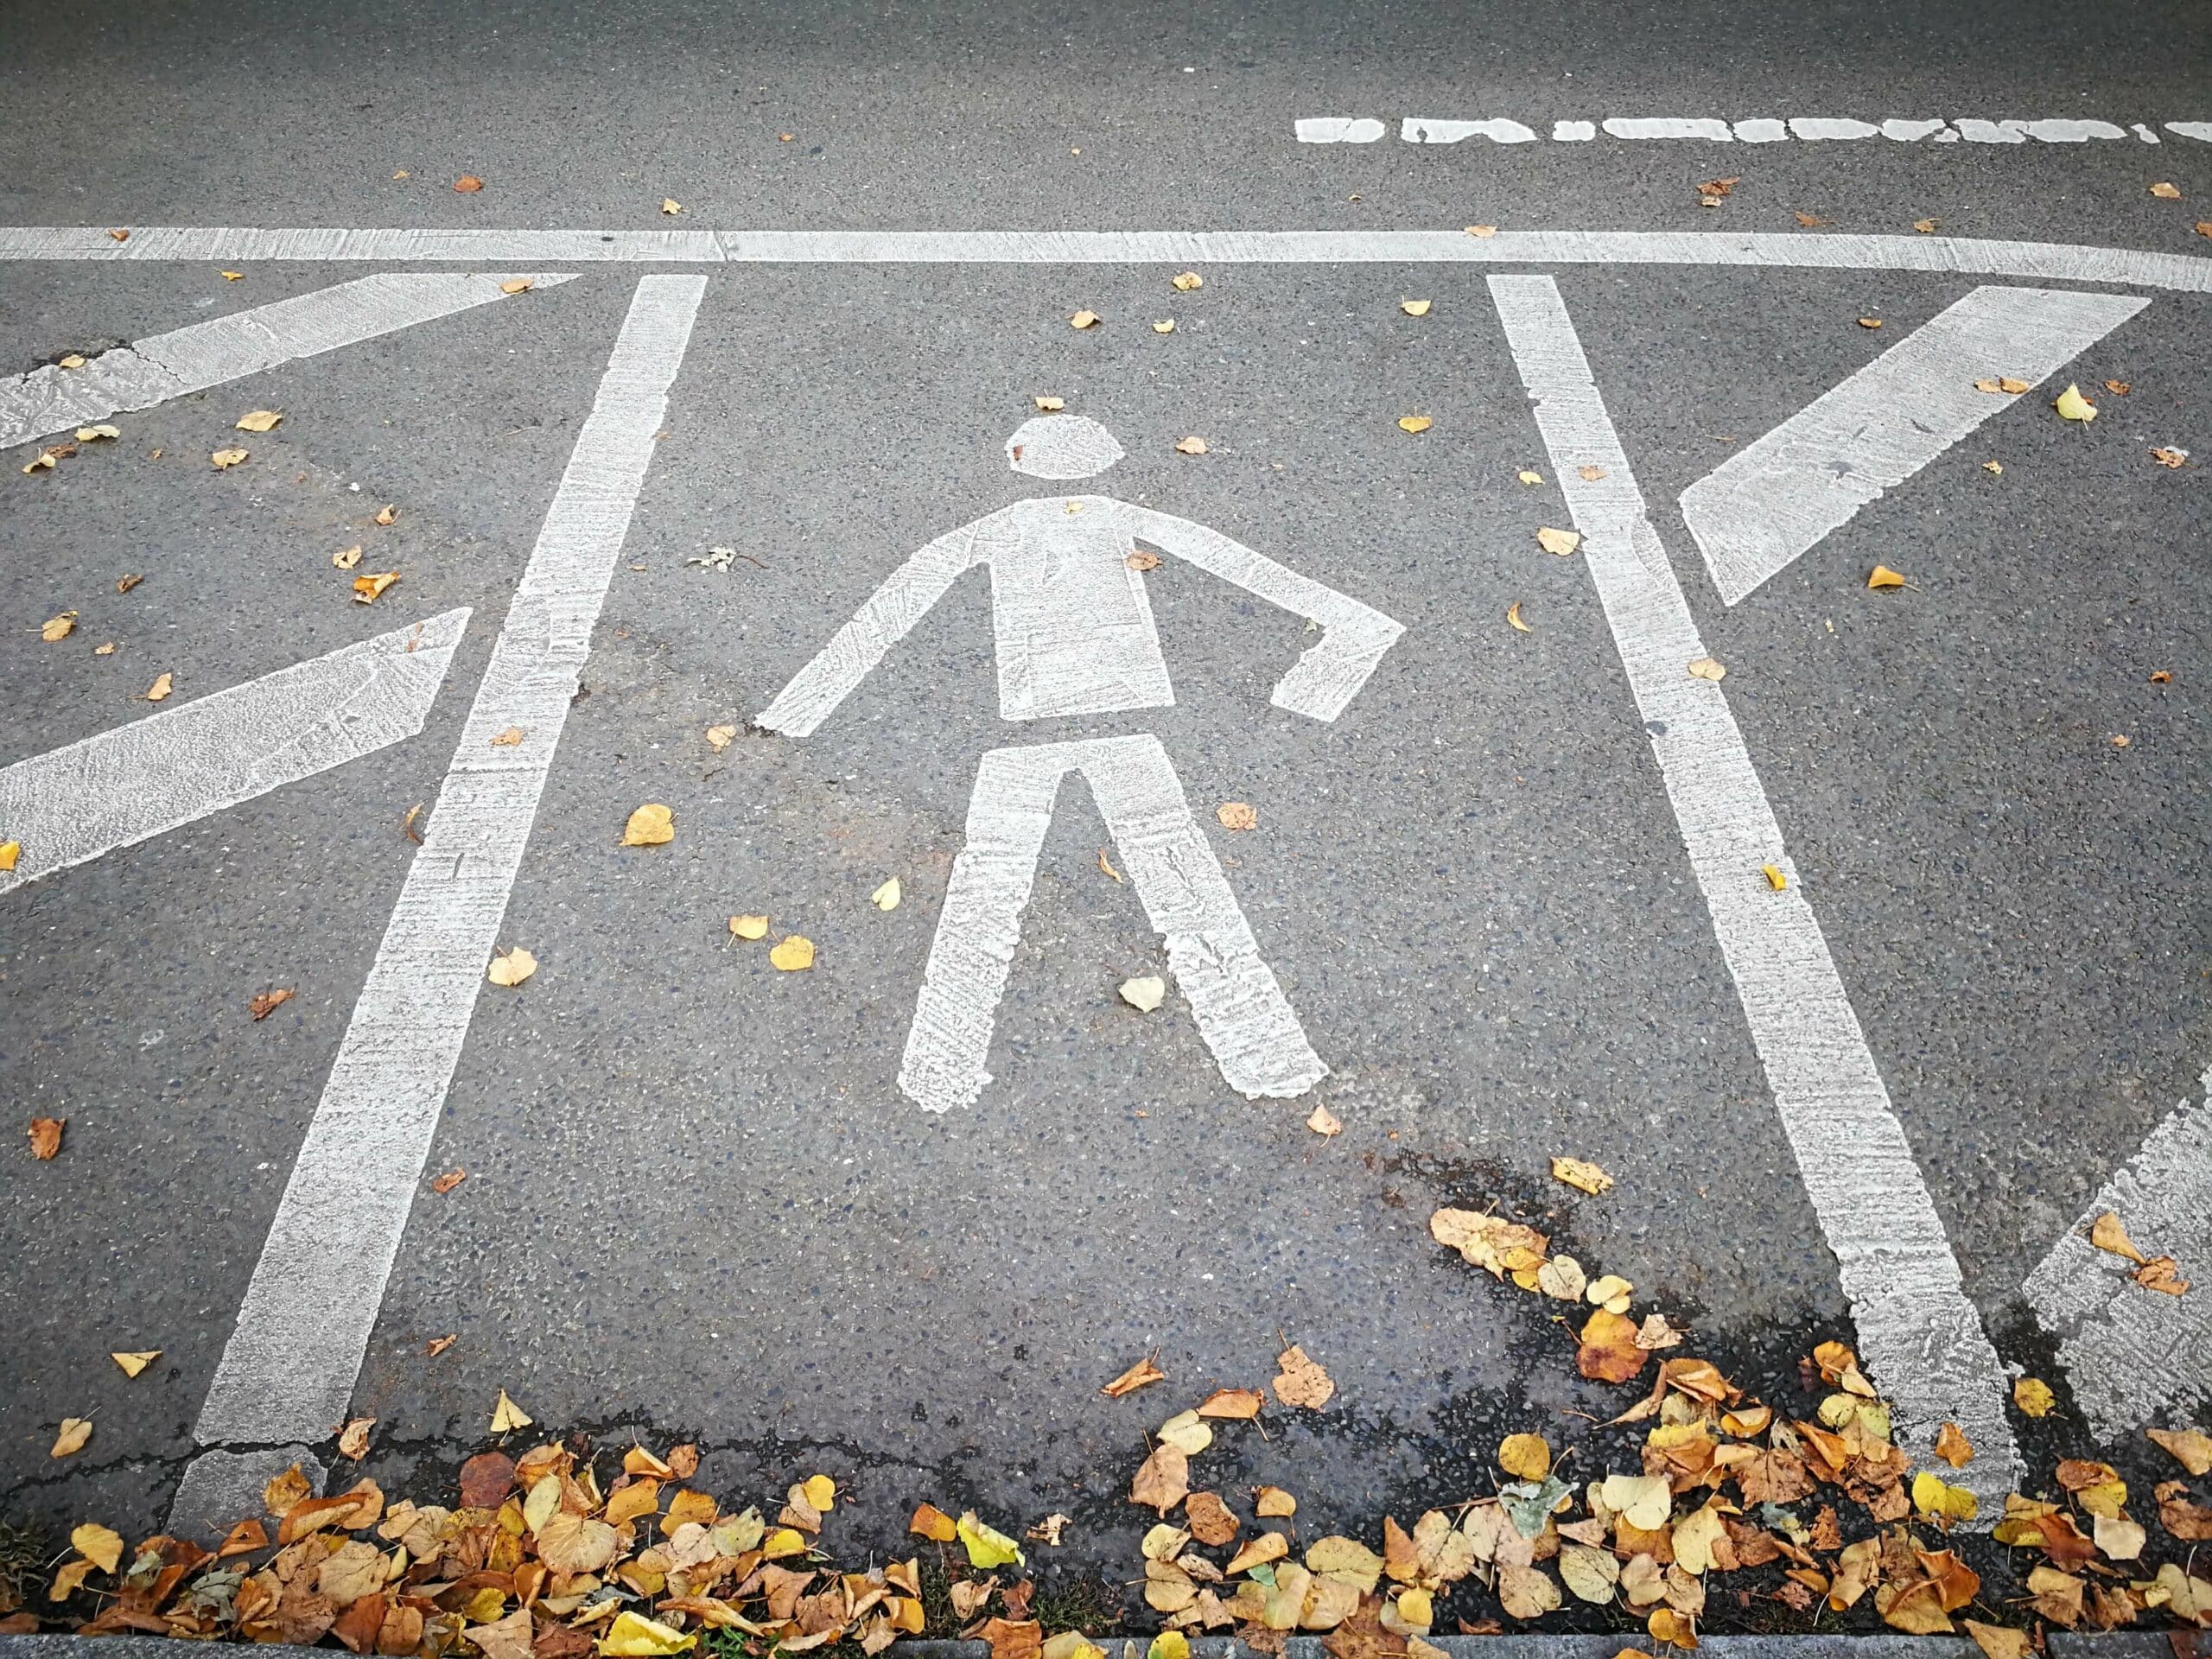 Hitting a Pedestrian with Your Car in EU: What You Need to Know